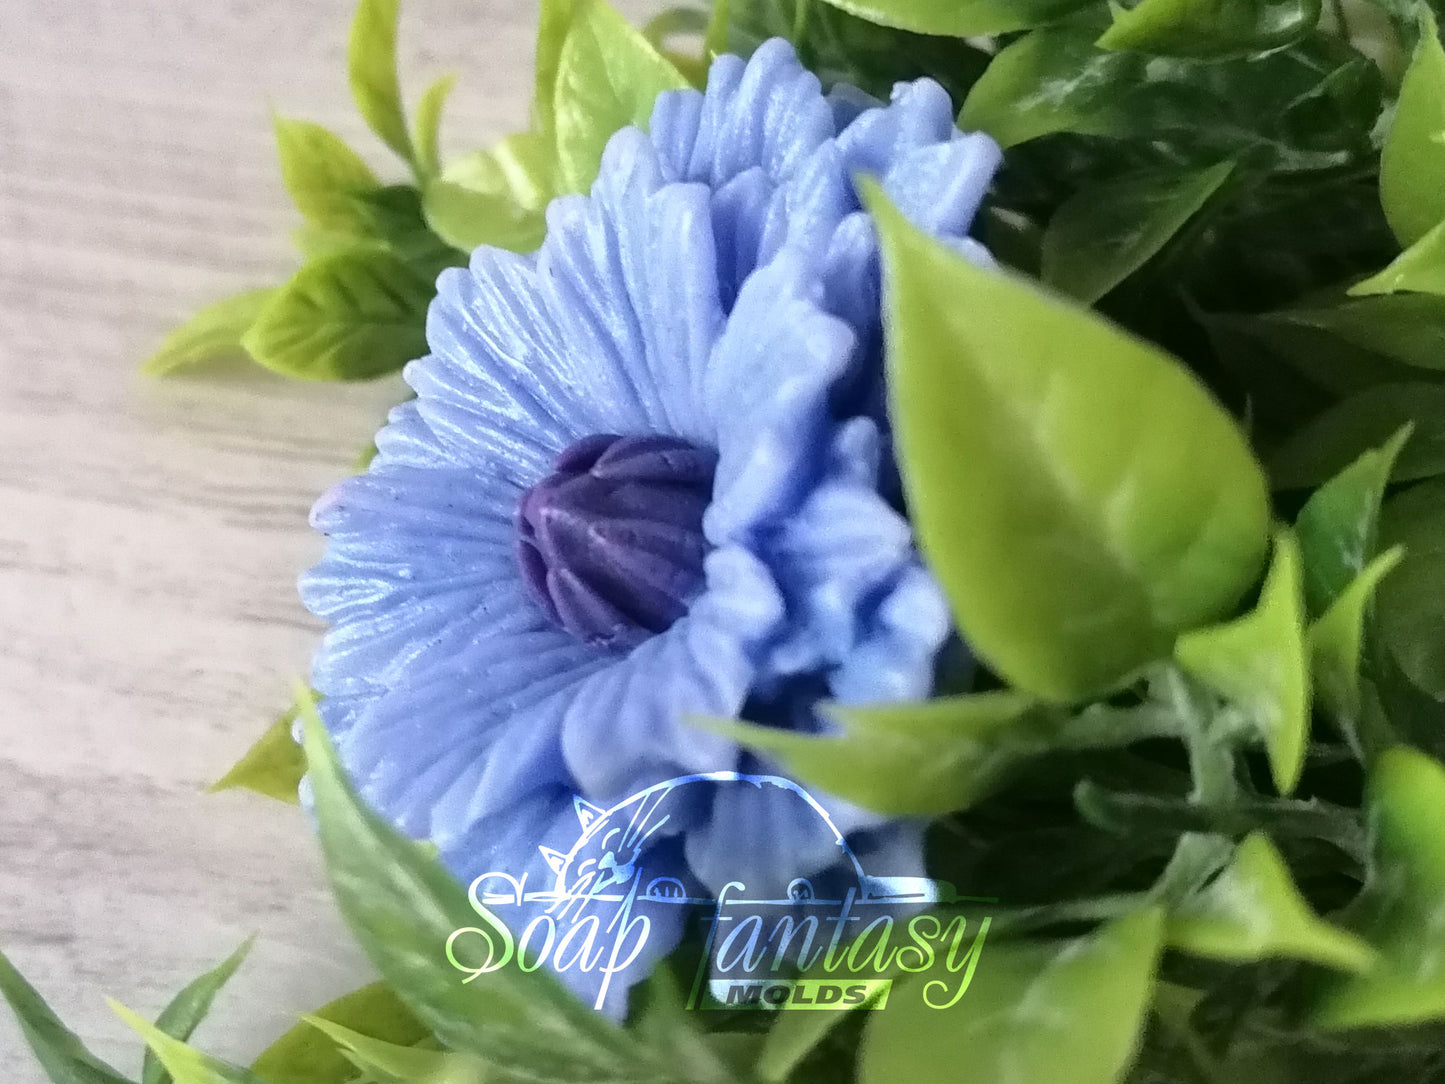 Blue cornflower silicone mold for soap making